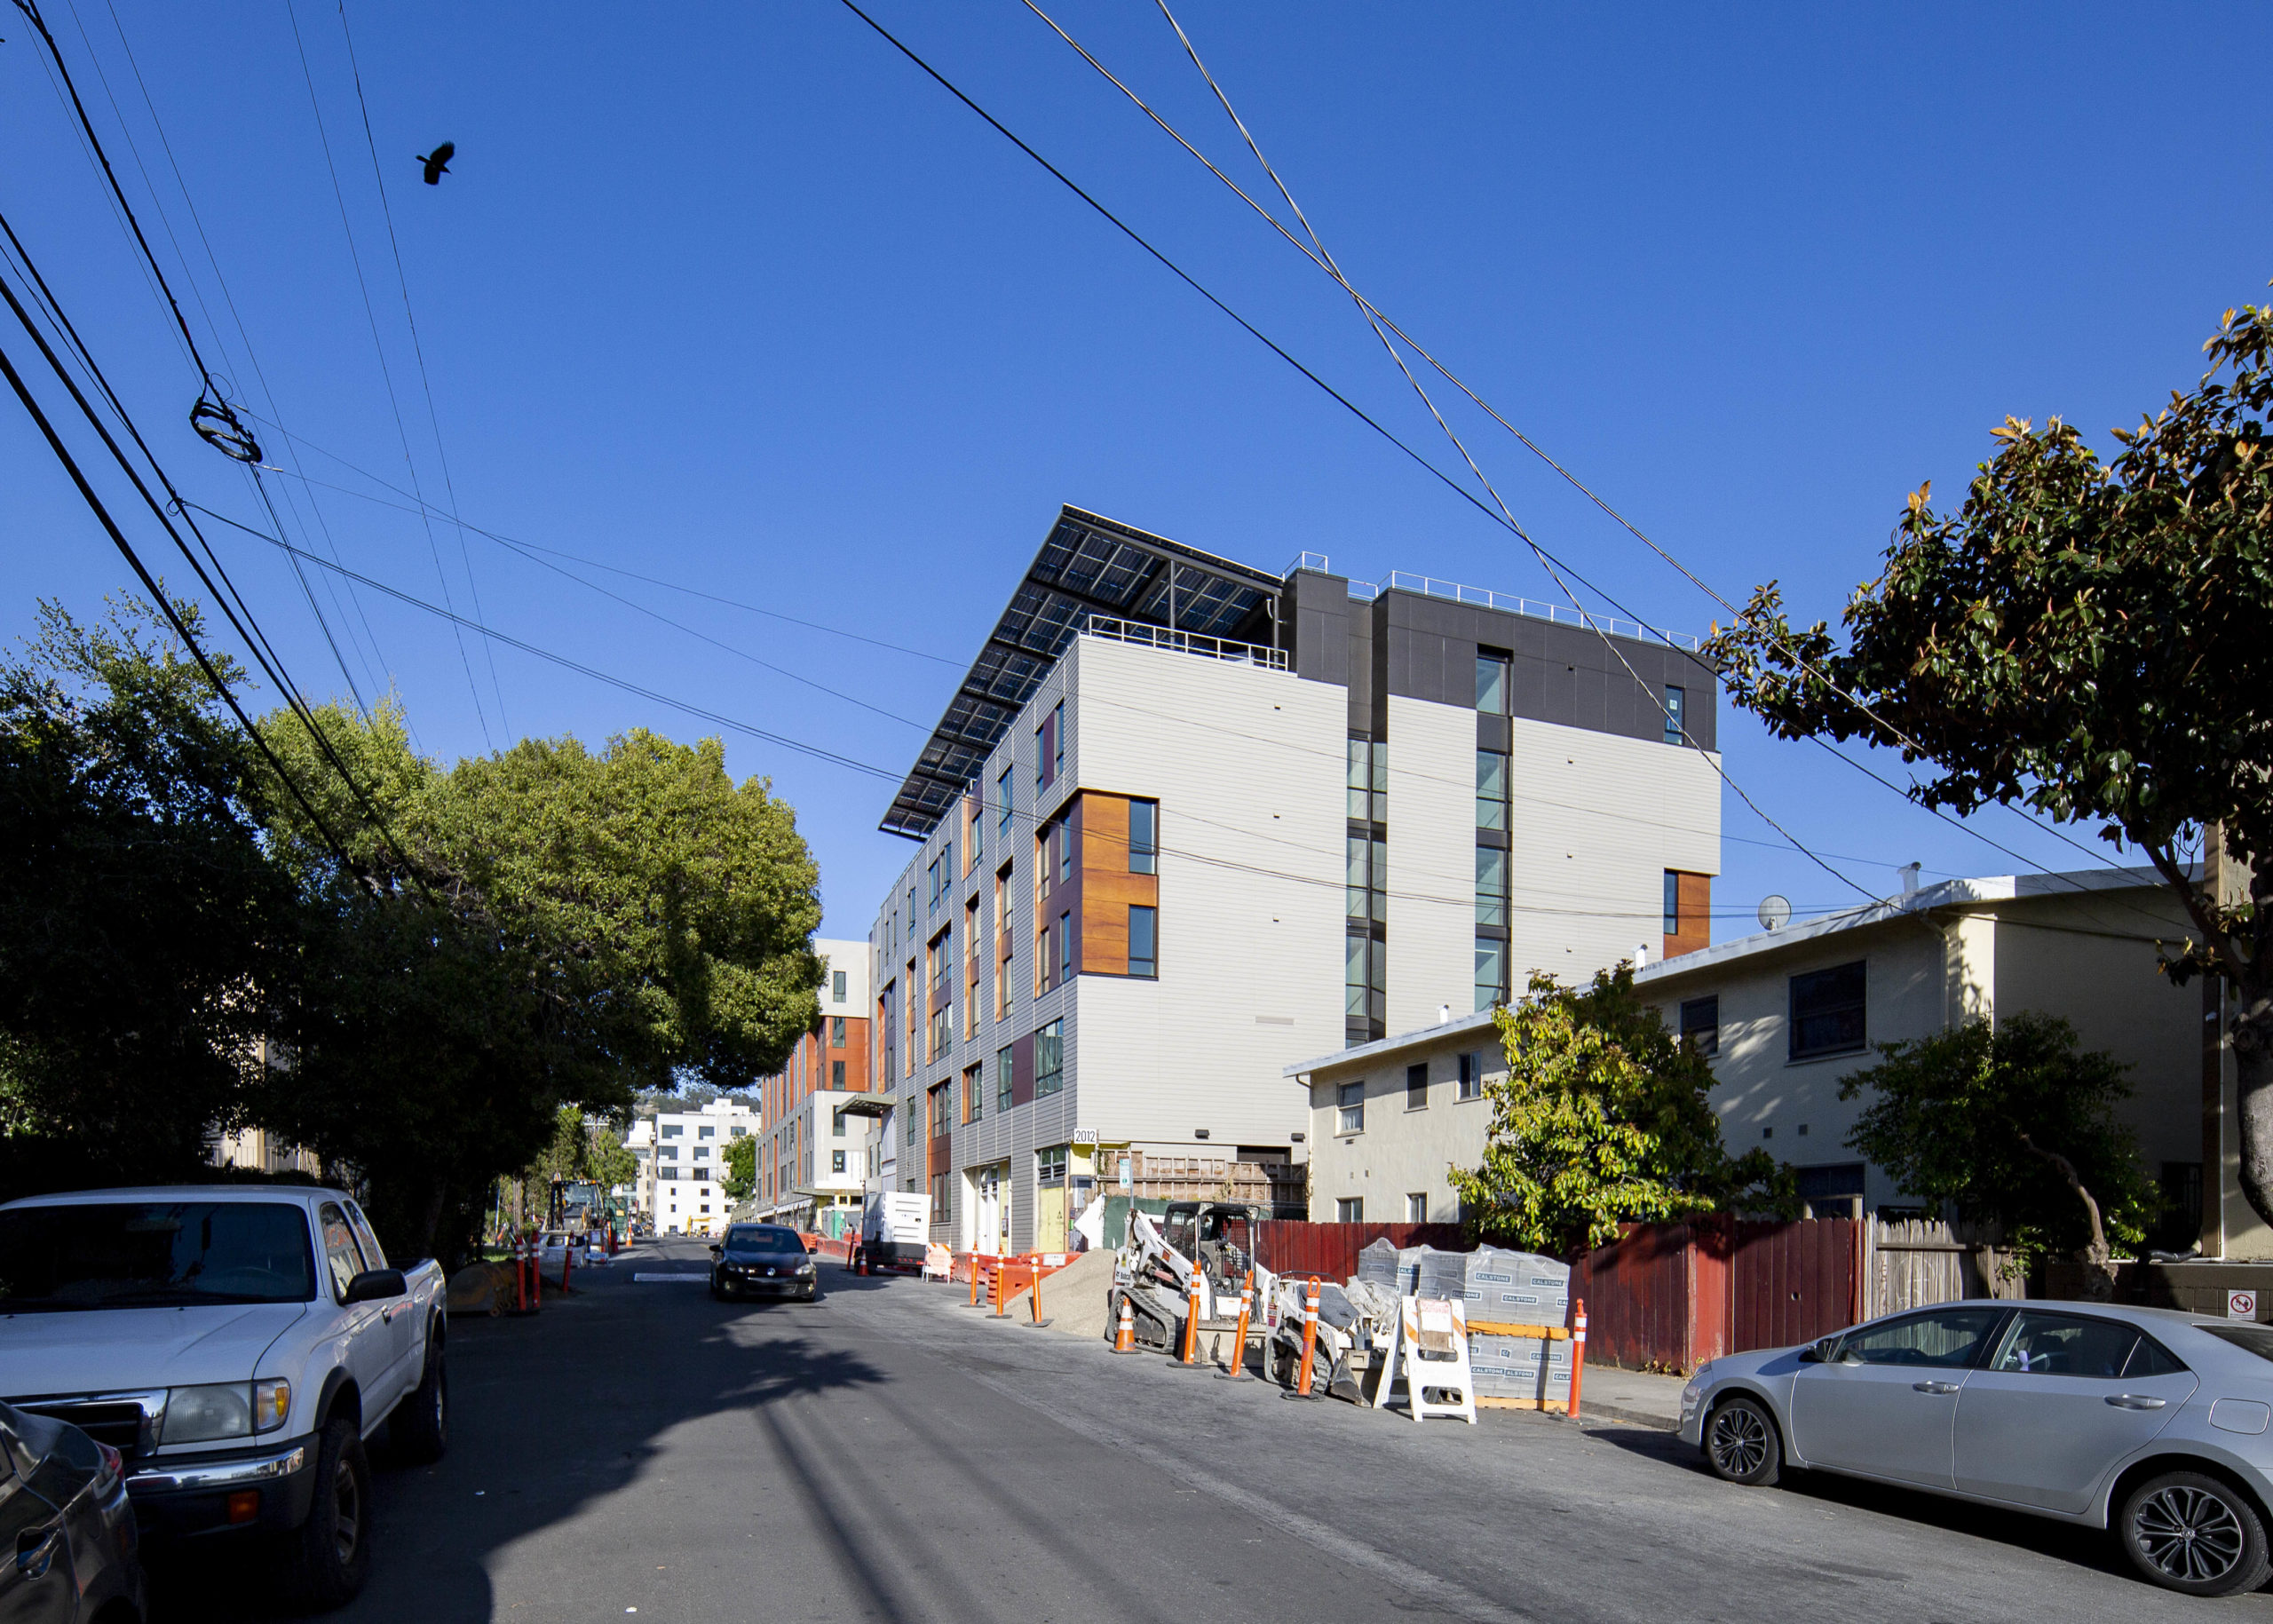 2012 Berkeley Way from Milvia Street, image by Andrew Campbell Nelson